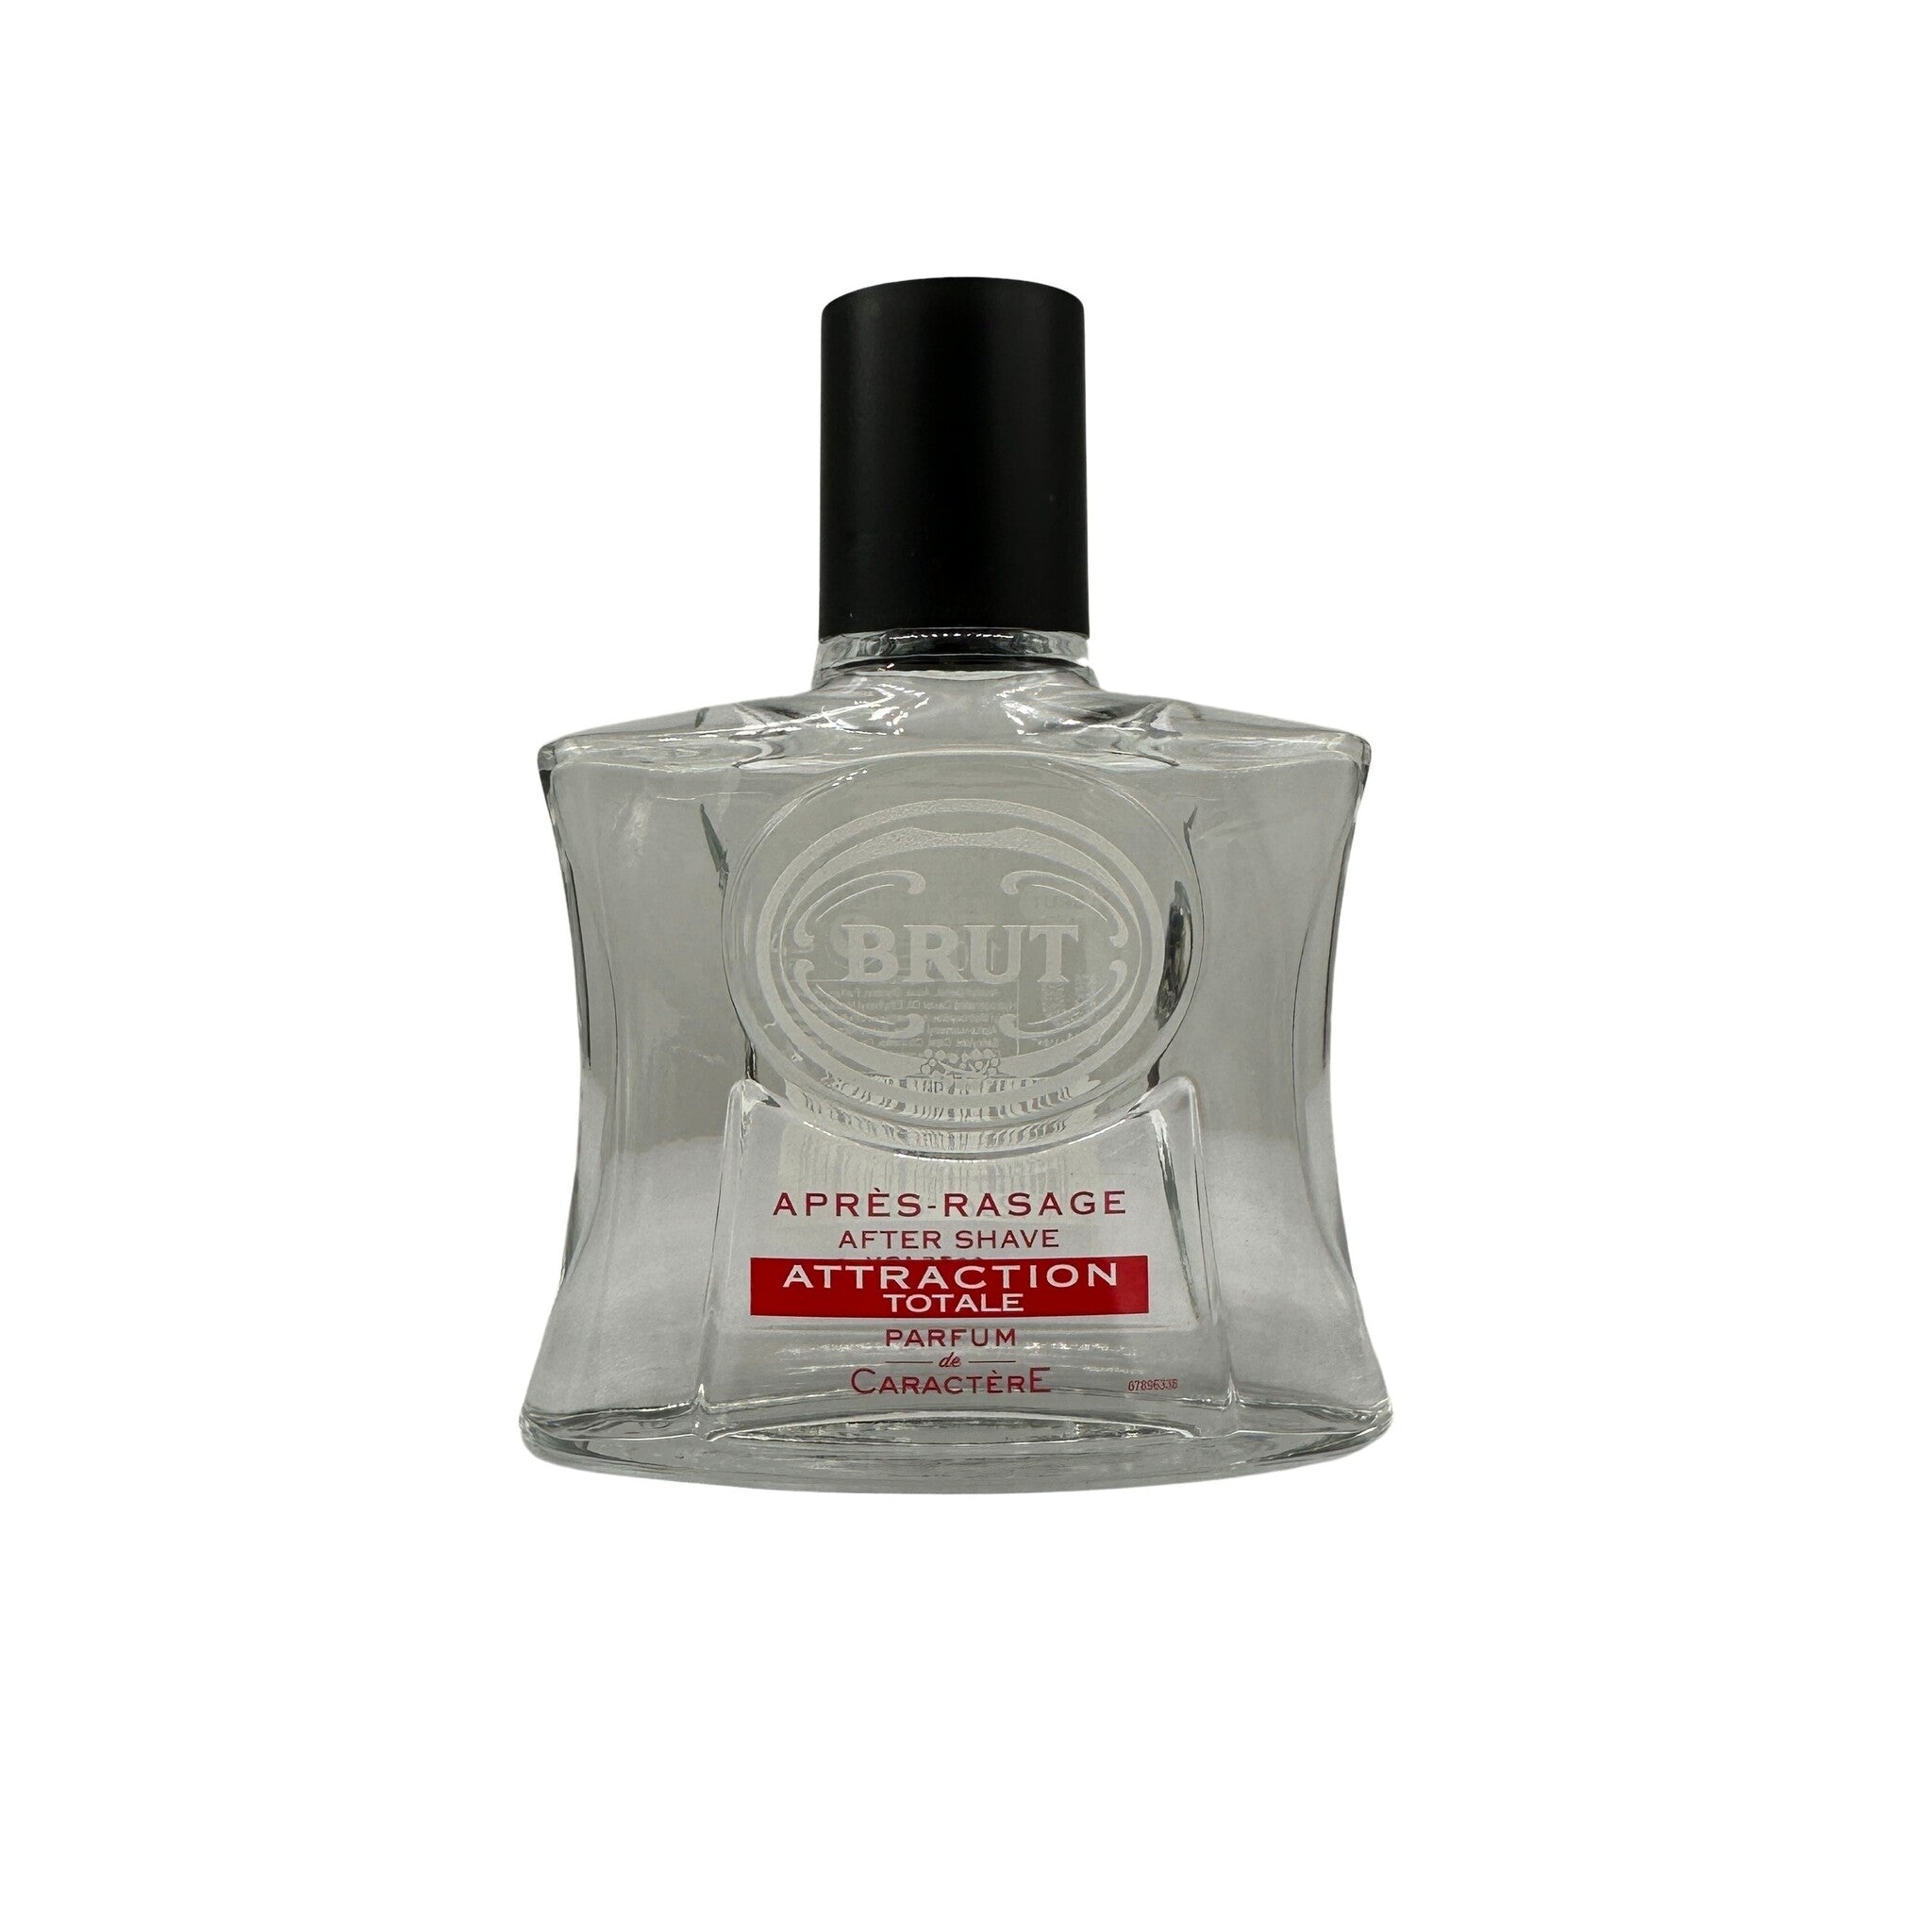 Brut aftershave Total Attraction 100ml